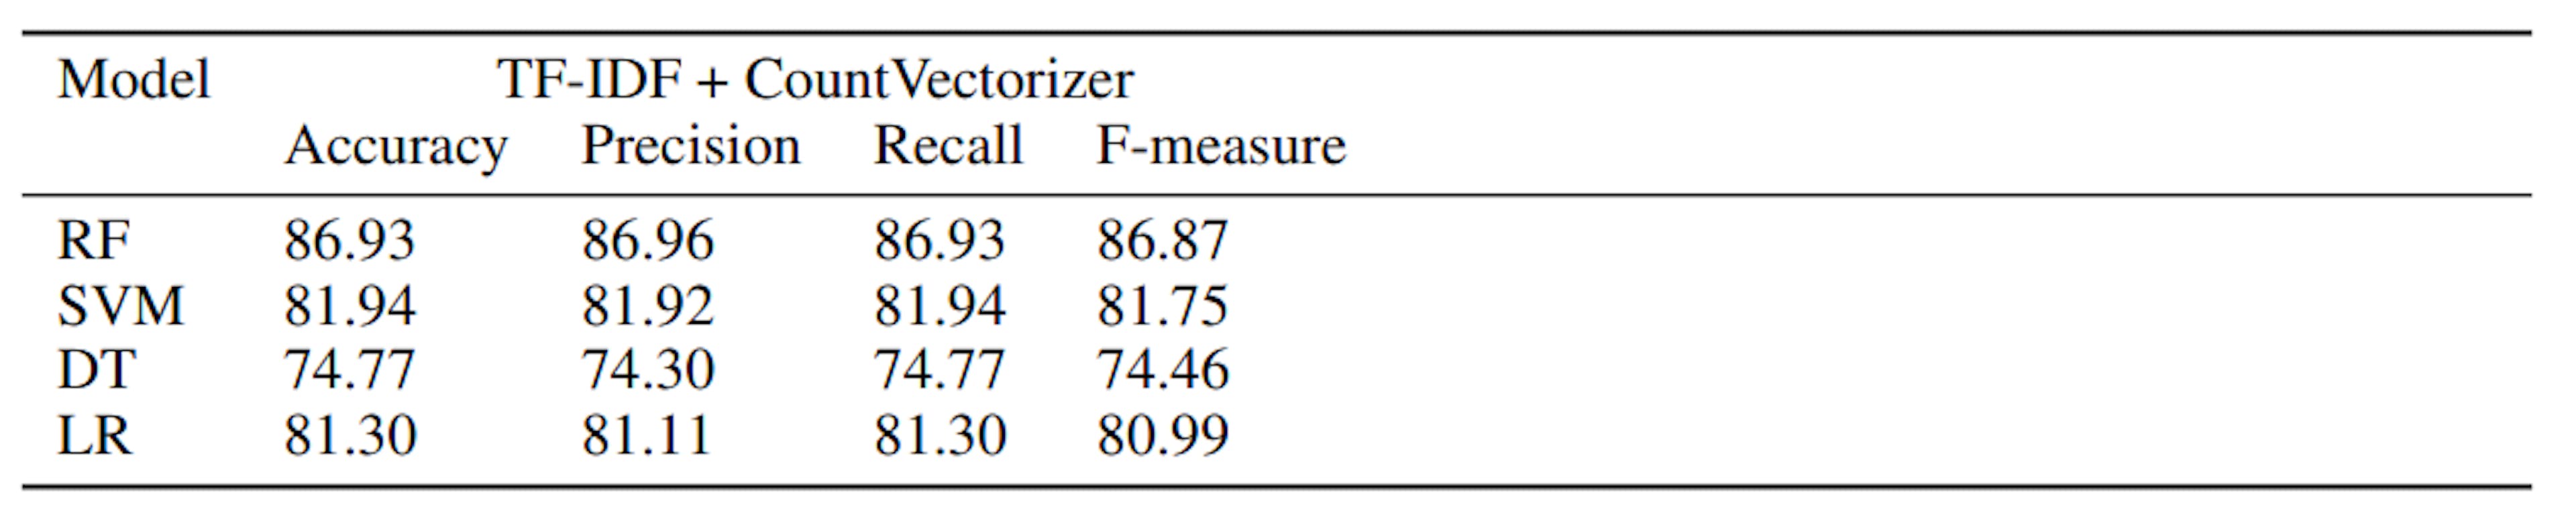 Table 5: Precision, Recall, Accuracy, and F-Measure values for TF-IDF + CountVectorizer